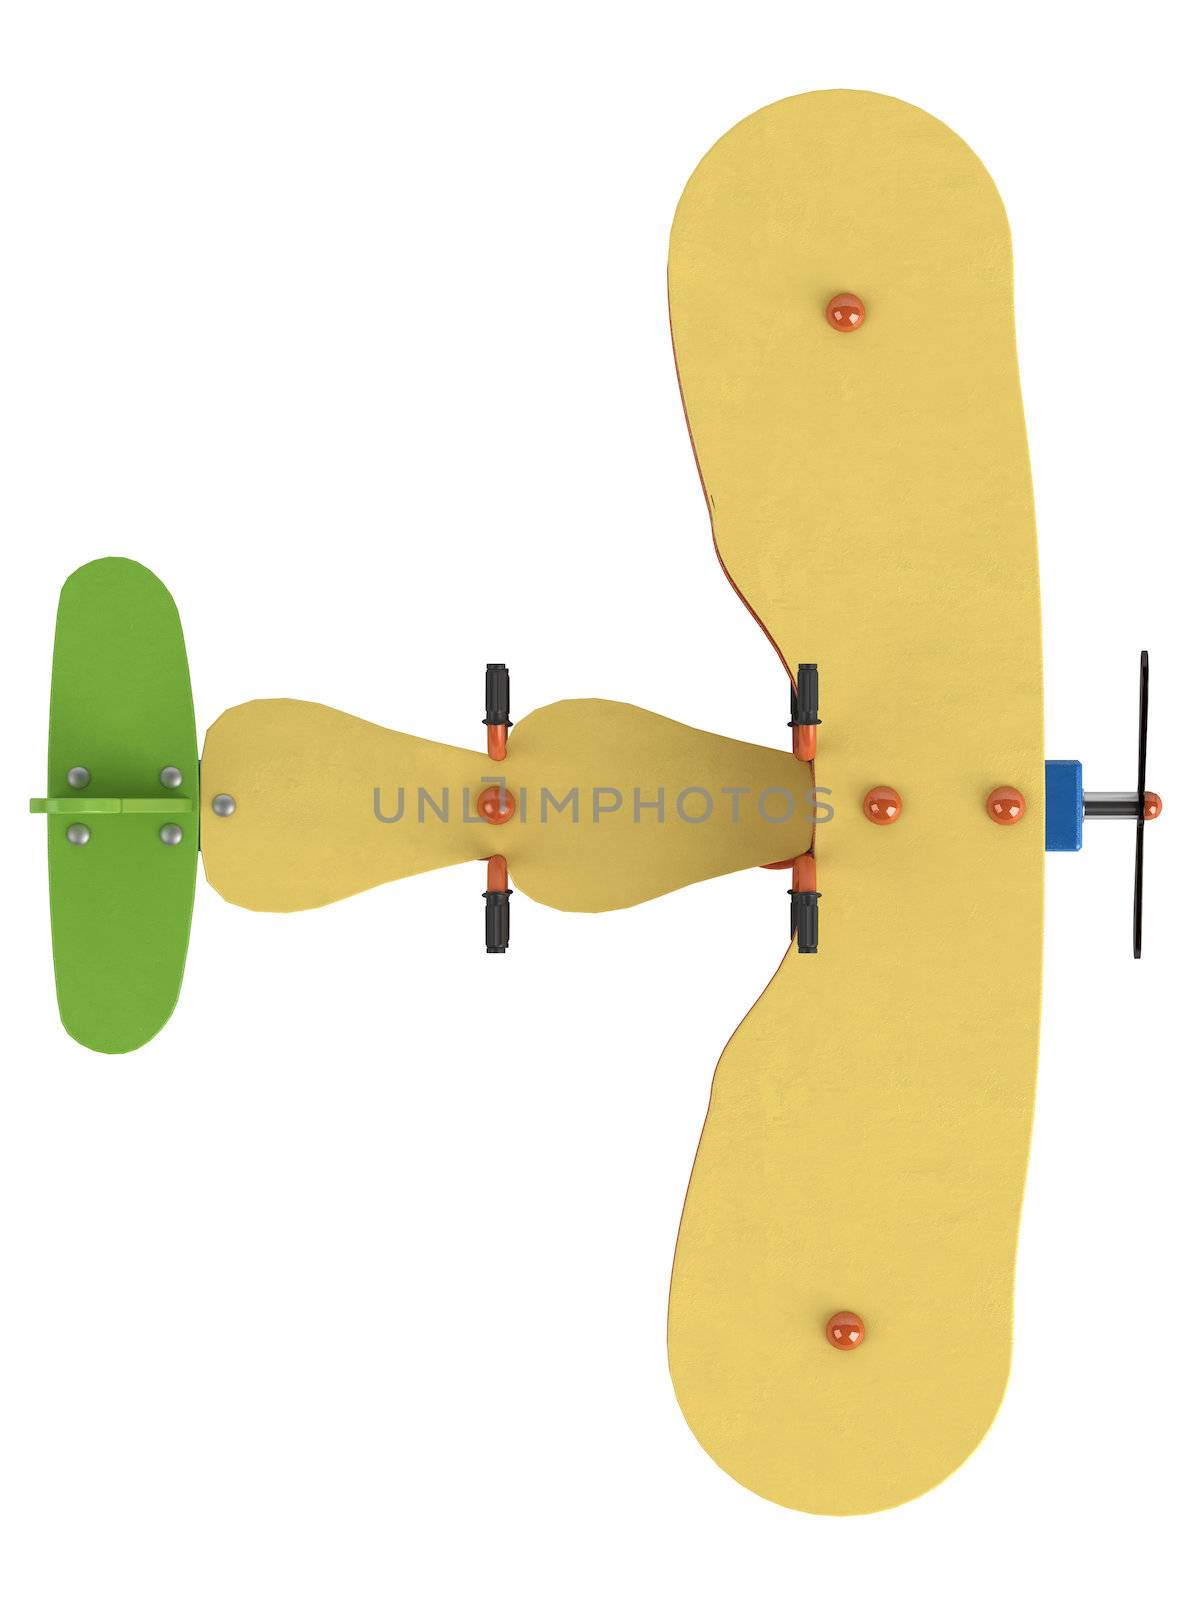 Bouncy aeroplane on springs for preschool children to ride on in a playground isolated on a white background